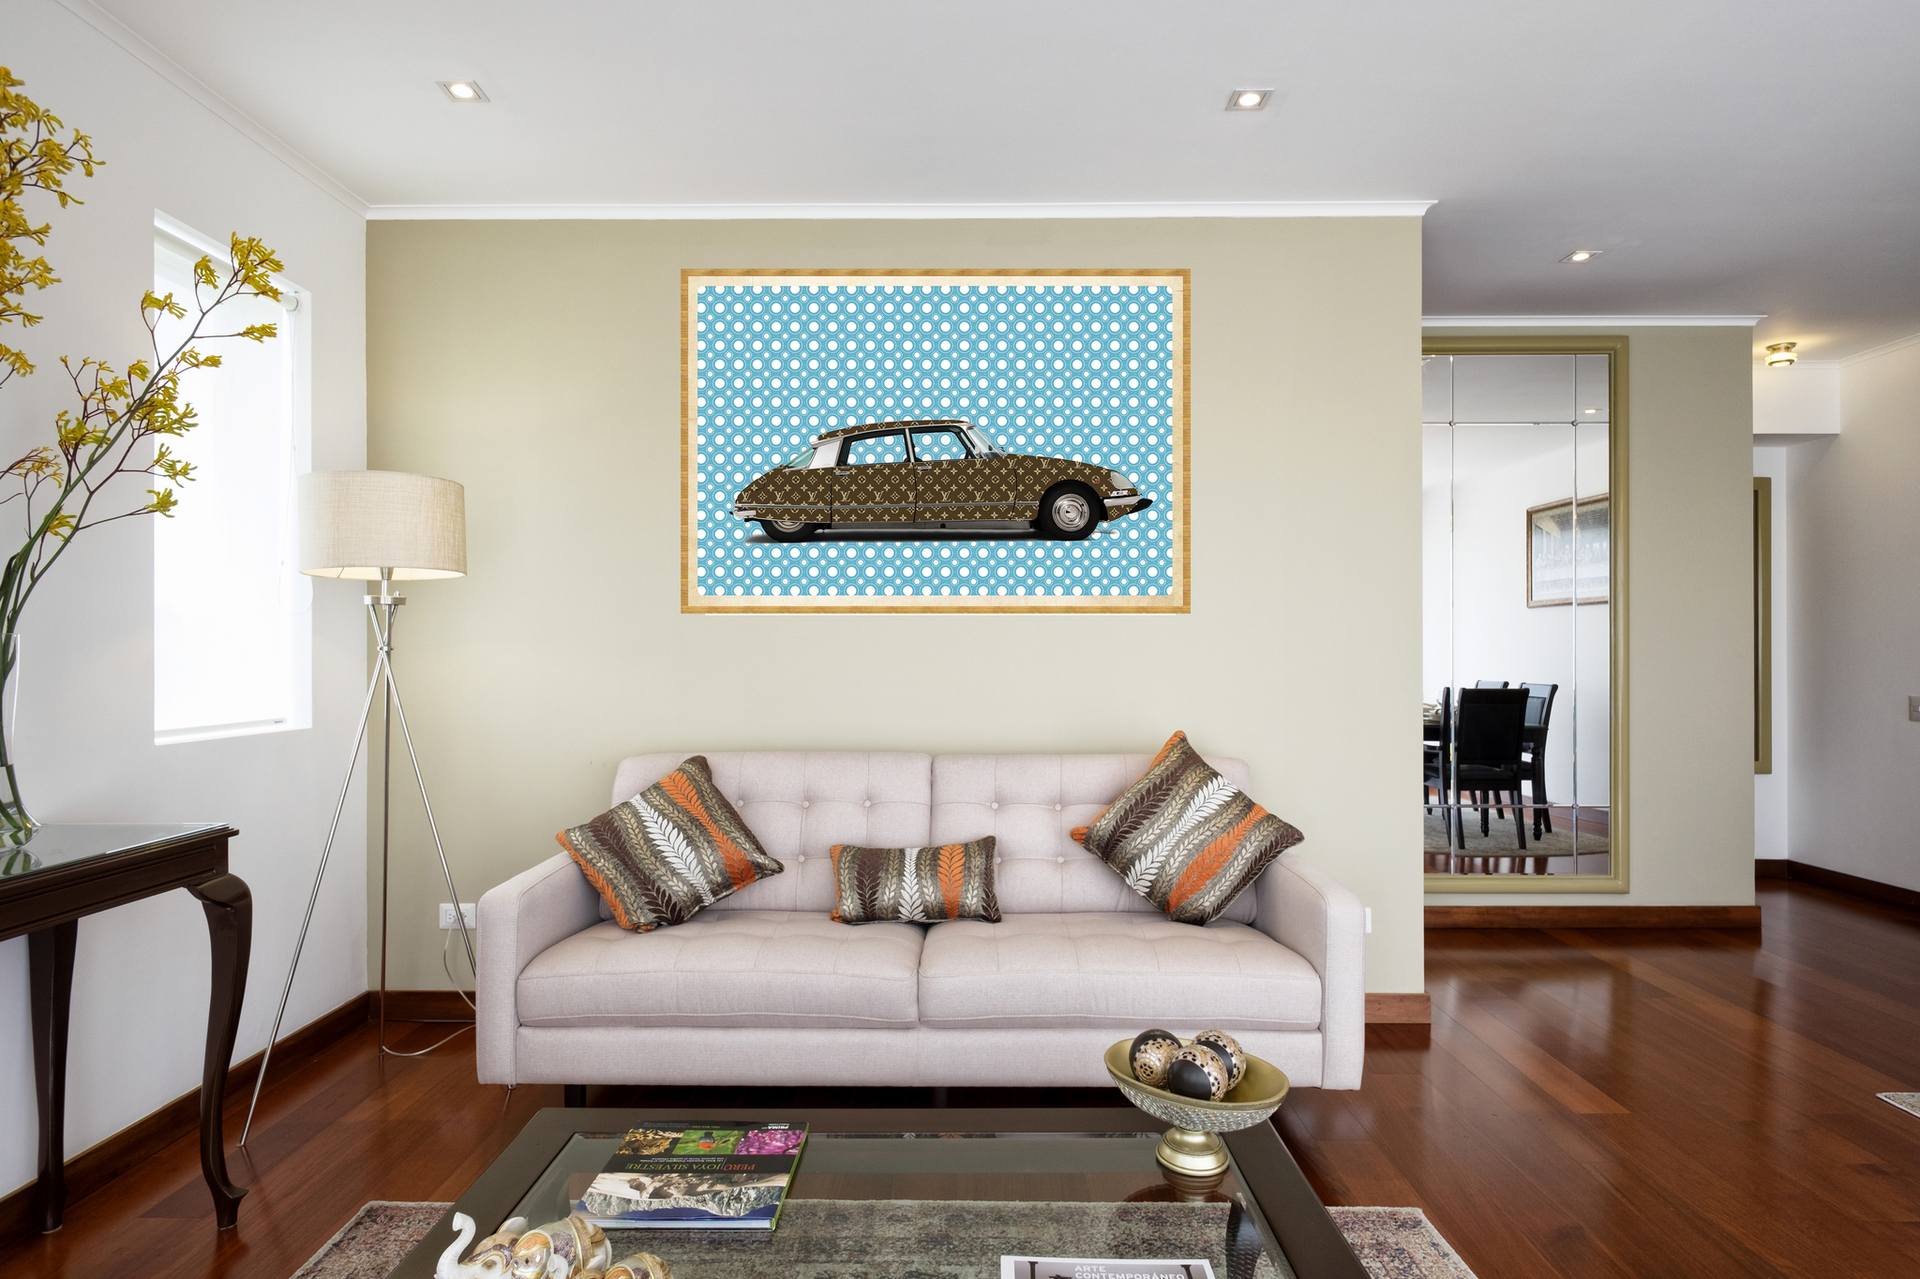 Citroen DS Louis Vuitton - Limited Edition by Marco Simola, Mixed media